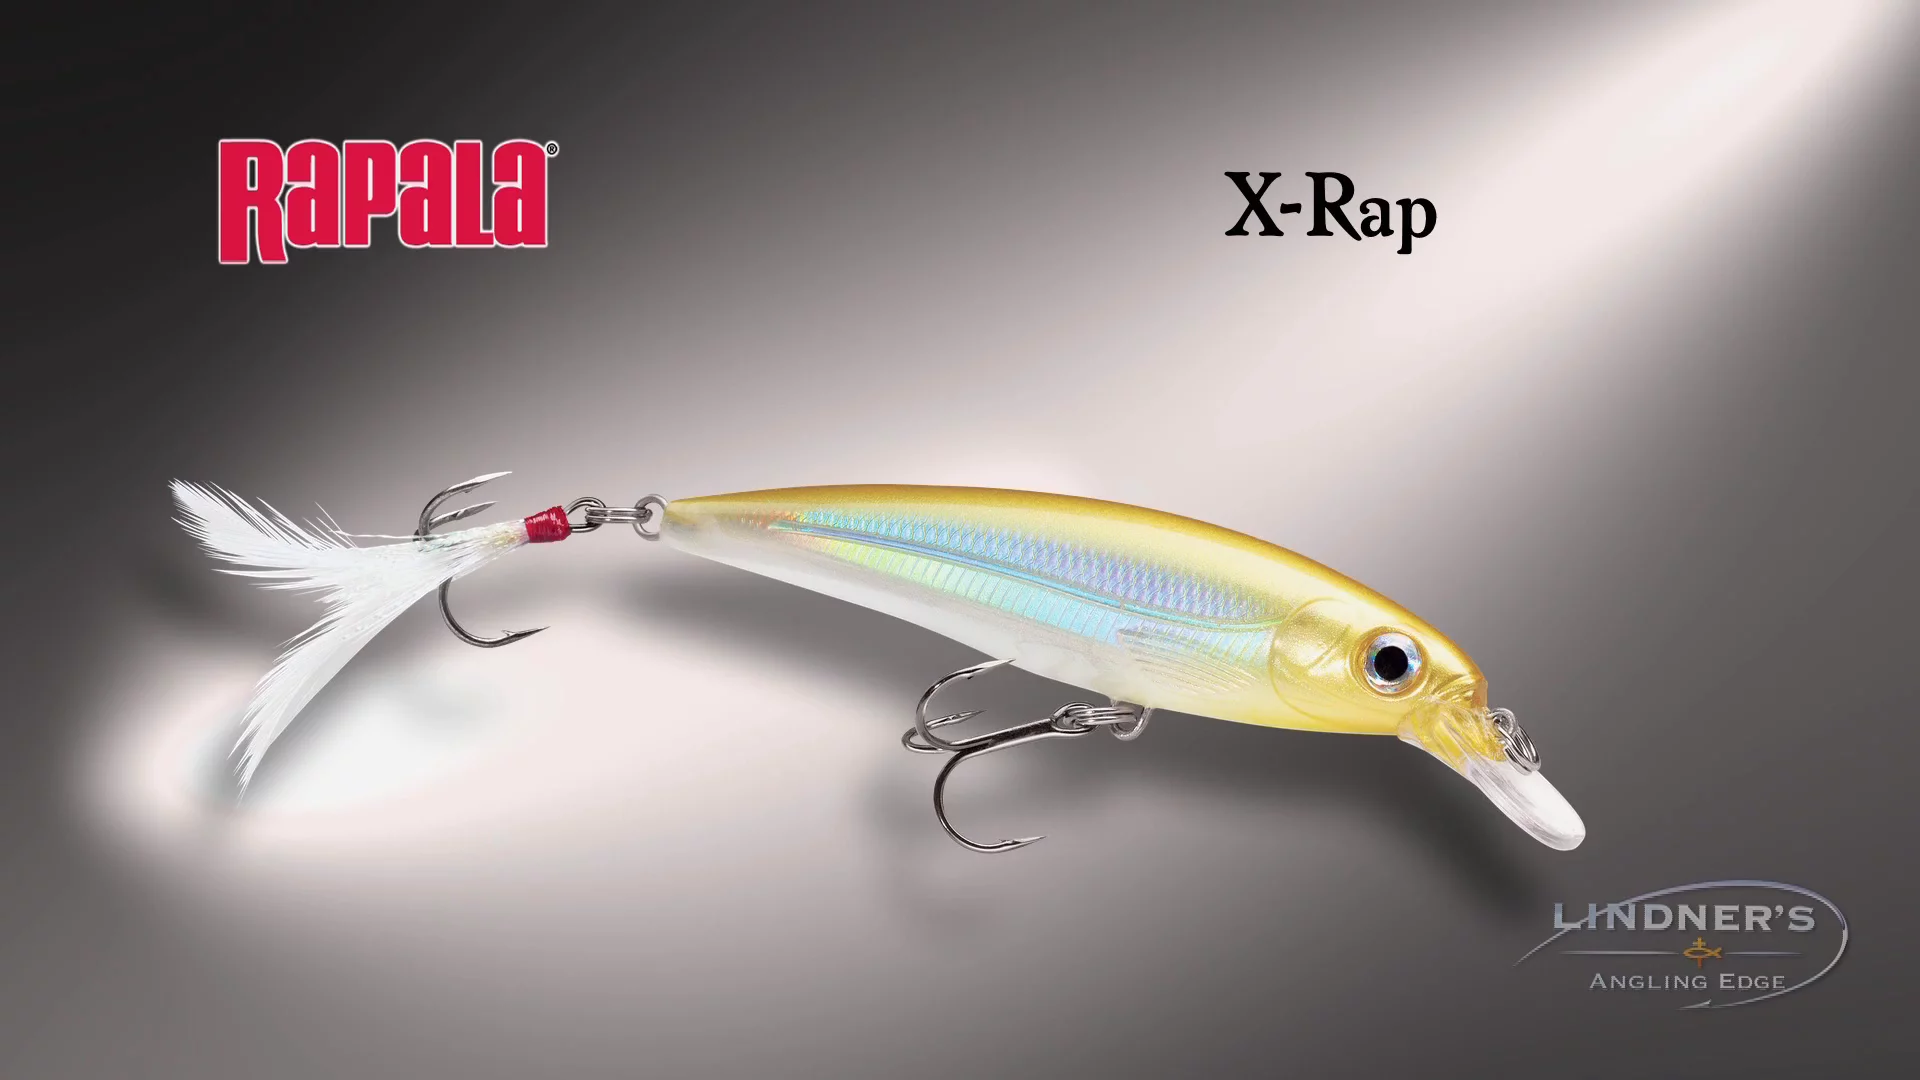 Hit the Brakes with the Rapala Rip Stop